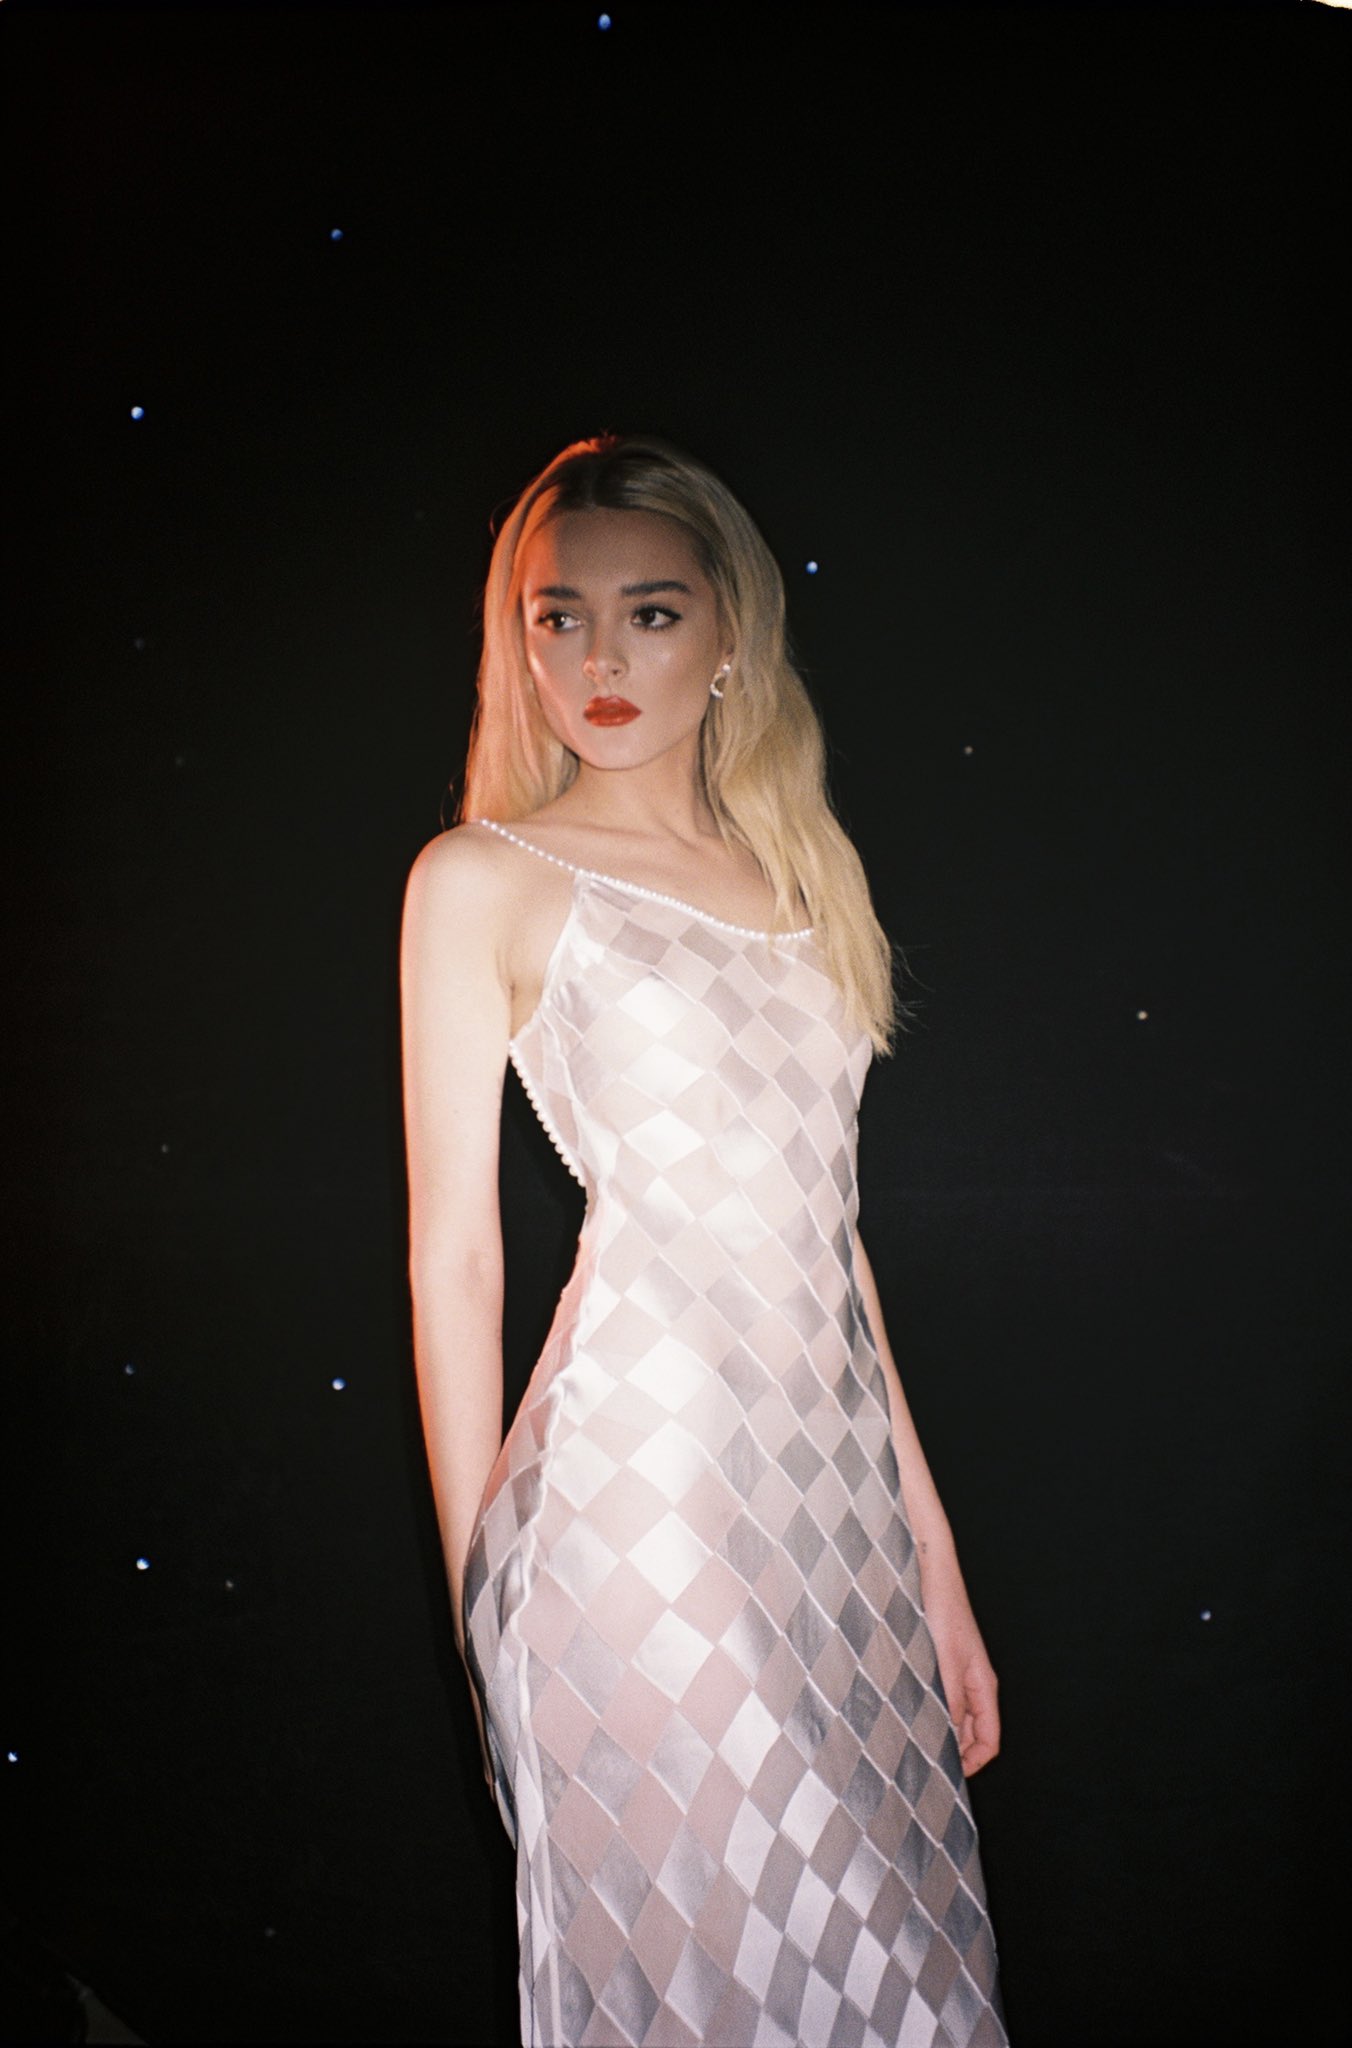 Photos n°19 : Charlotte Lawrence Wears the Viral Dress!